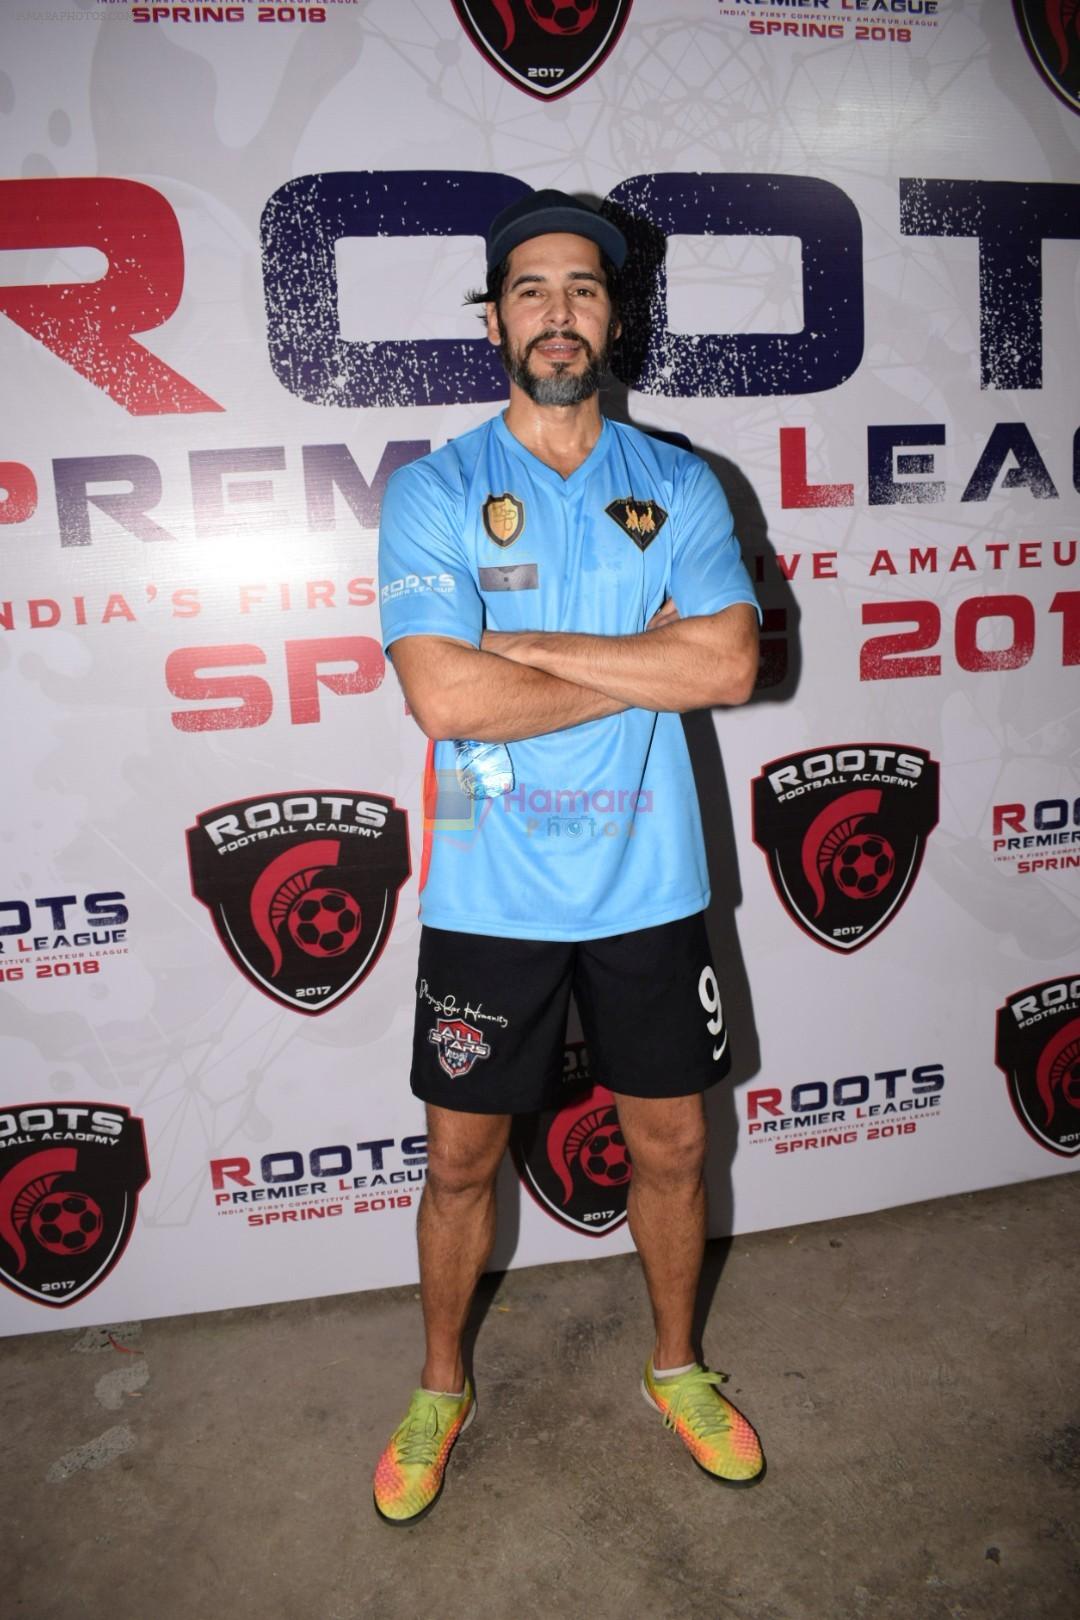 Dino Morea at Roots Premiere League Spring Season 2018 For Amateur Football In India on 14th March 2018